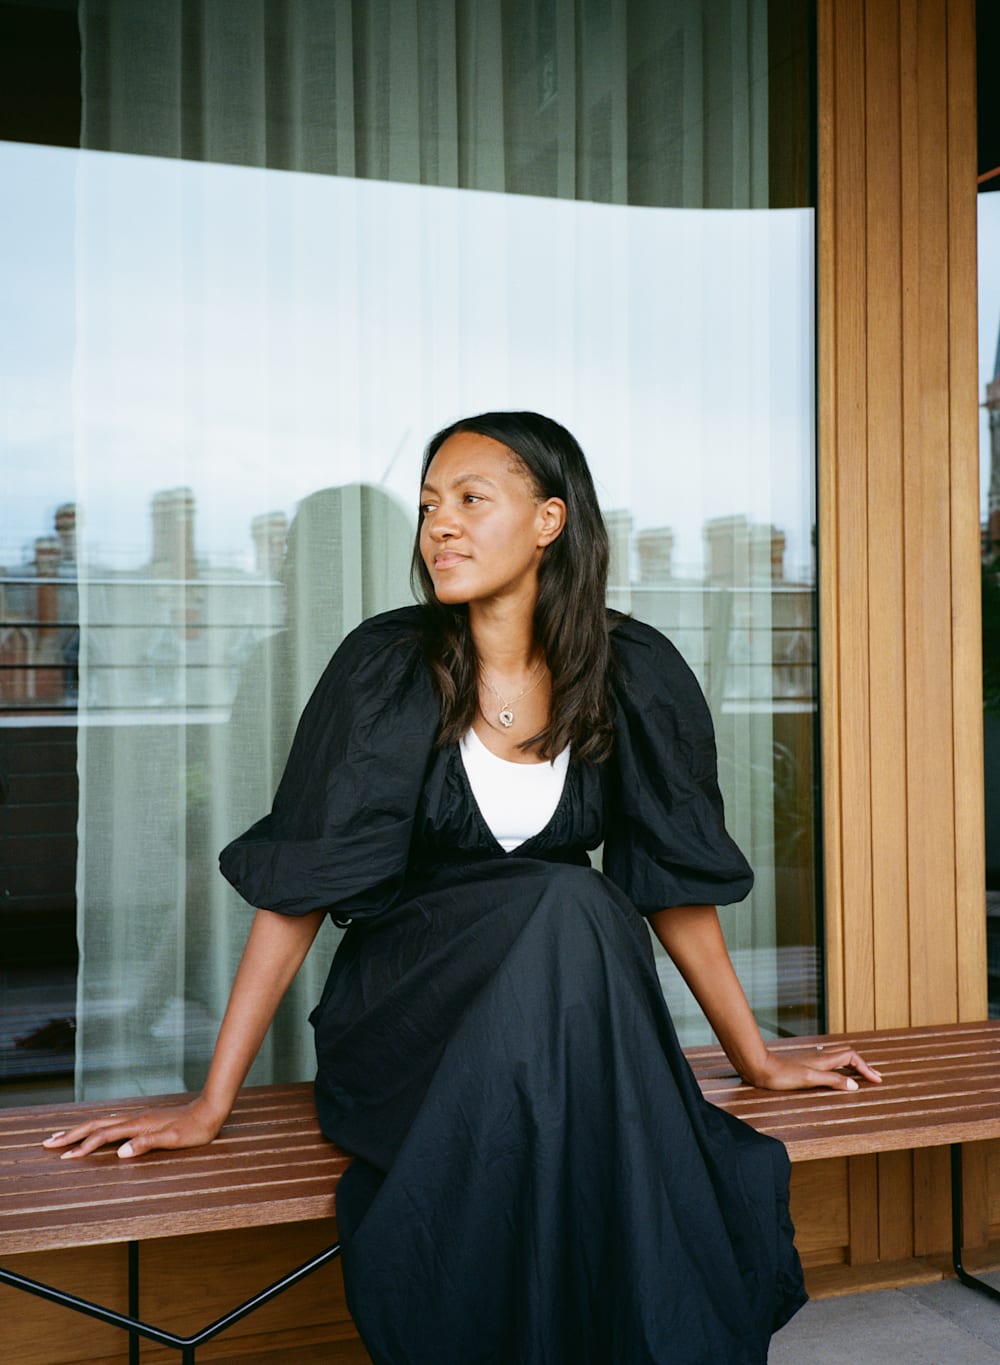 Alice Casely-Hayford at the Standard London by Louis AW Sheridan | Mr & Mrs Smith